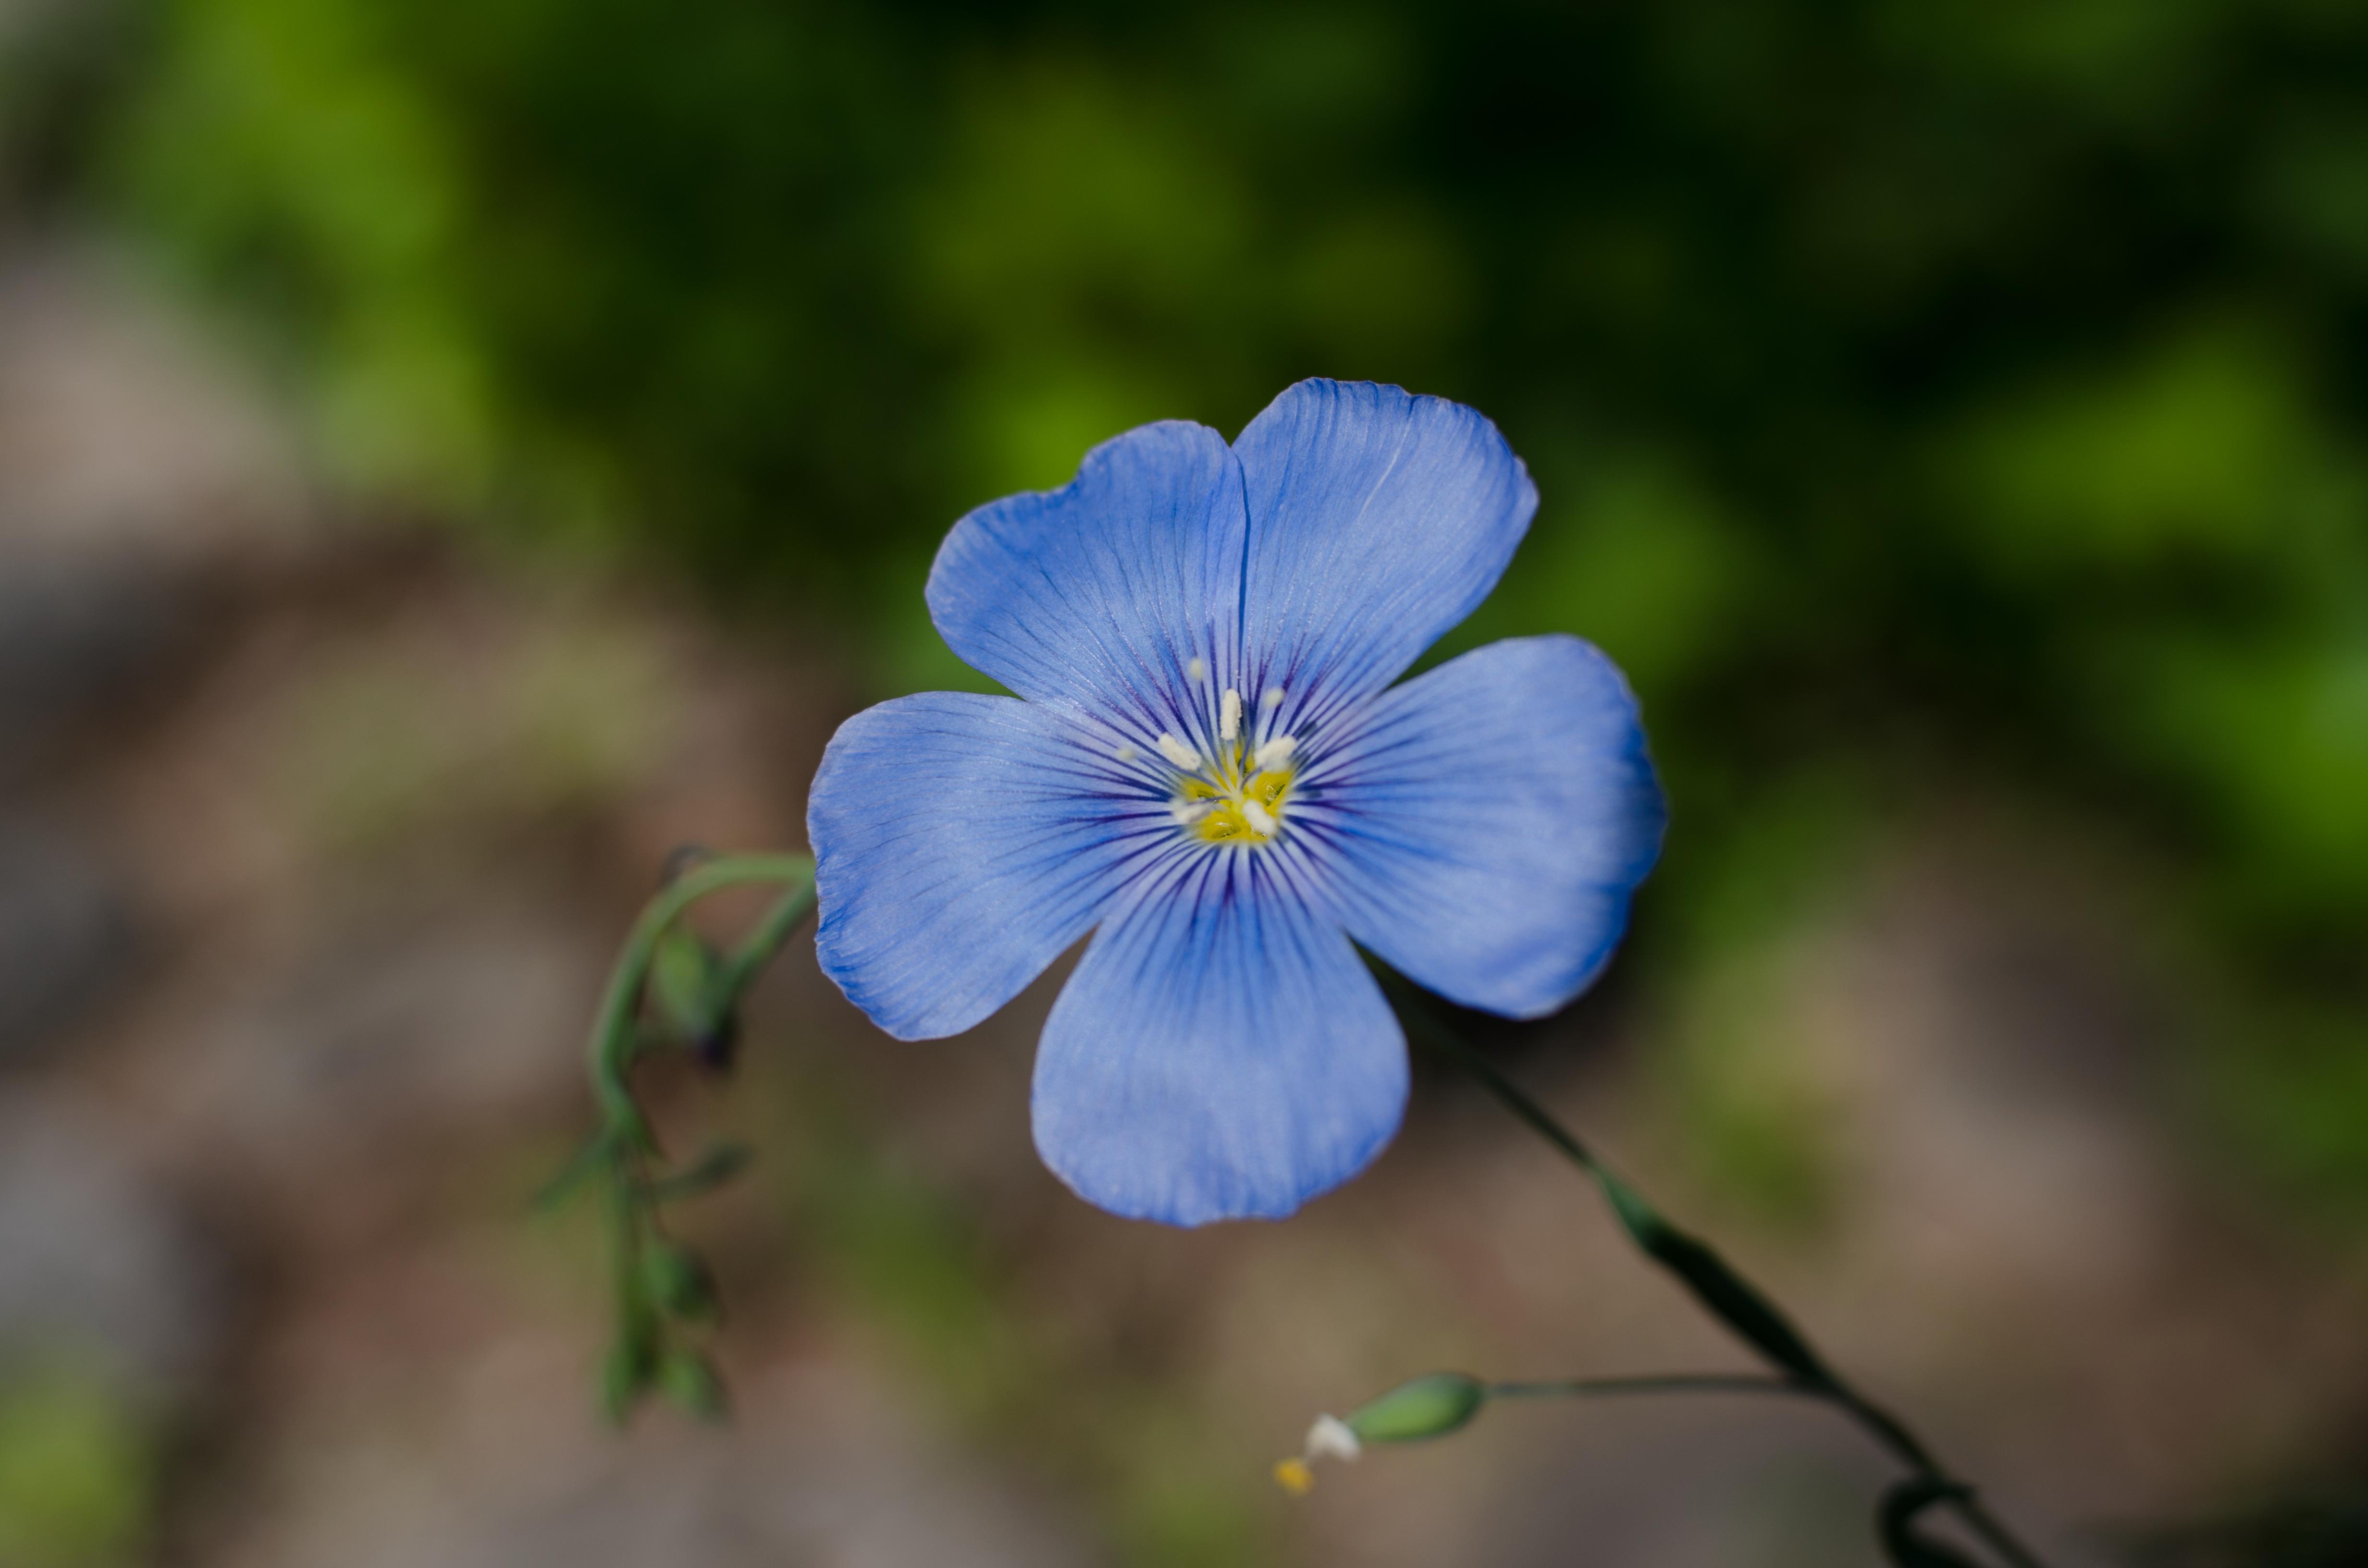 A picture of a blue flower.